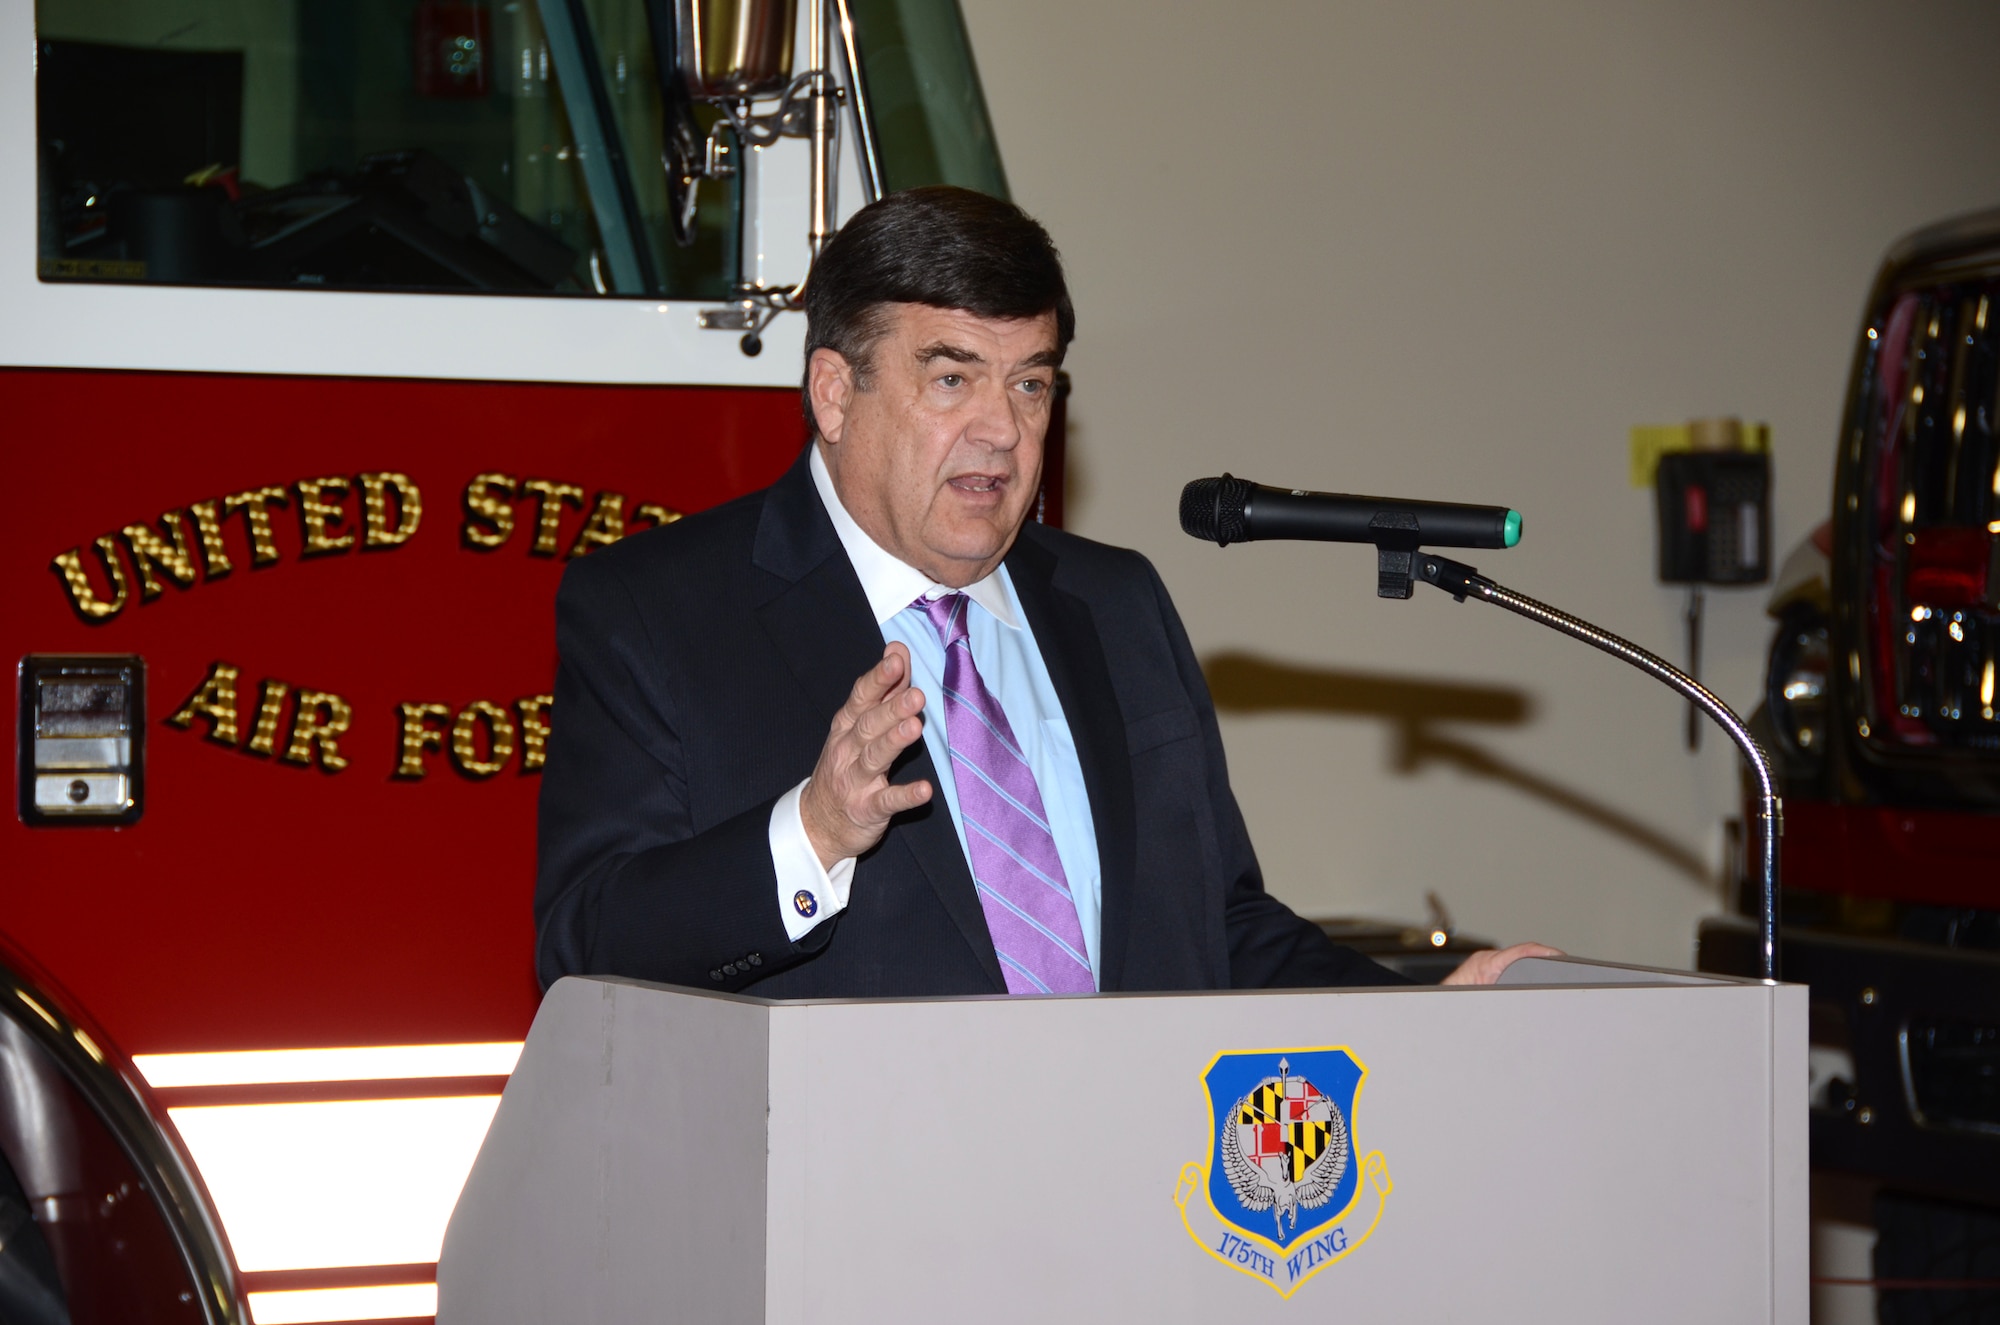 C.A. Dutch Ruppersberger, United States House of Representative for Maryland’s 2nd District, addresses the audience that attended the ribbon cutting ceremony for the new 21,000-square-foot state-of-the-art 175th Crash Fire Rescue Station at Maryland Air National Guard in Baltimore Maryland. The old fire station was two buildings that could not fit all the equipment in it. There was no ventilation for the fire trucks and training was held in the sleeping quarters. "It's not just about the building, it's about personnel," said Ruppersberger about the needed upgrade.  (National Guard photo by Master Sgt. Ed Bard/RELEASED)